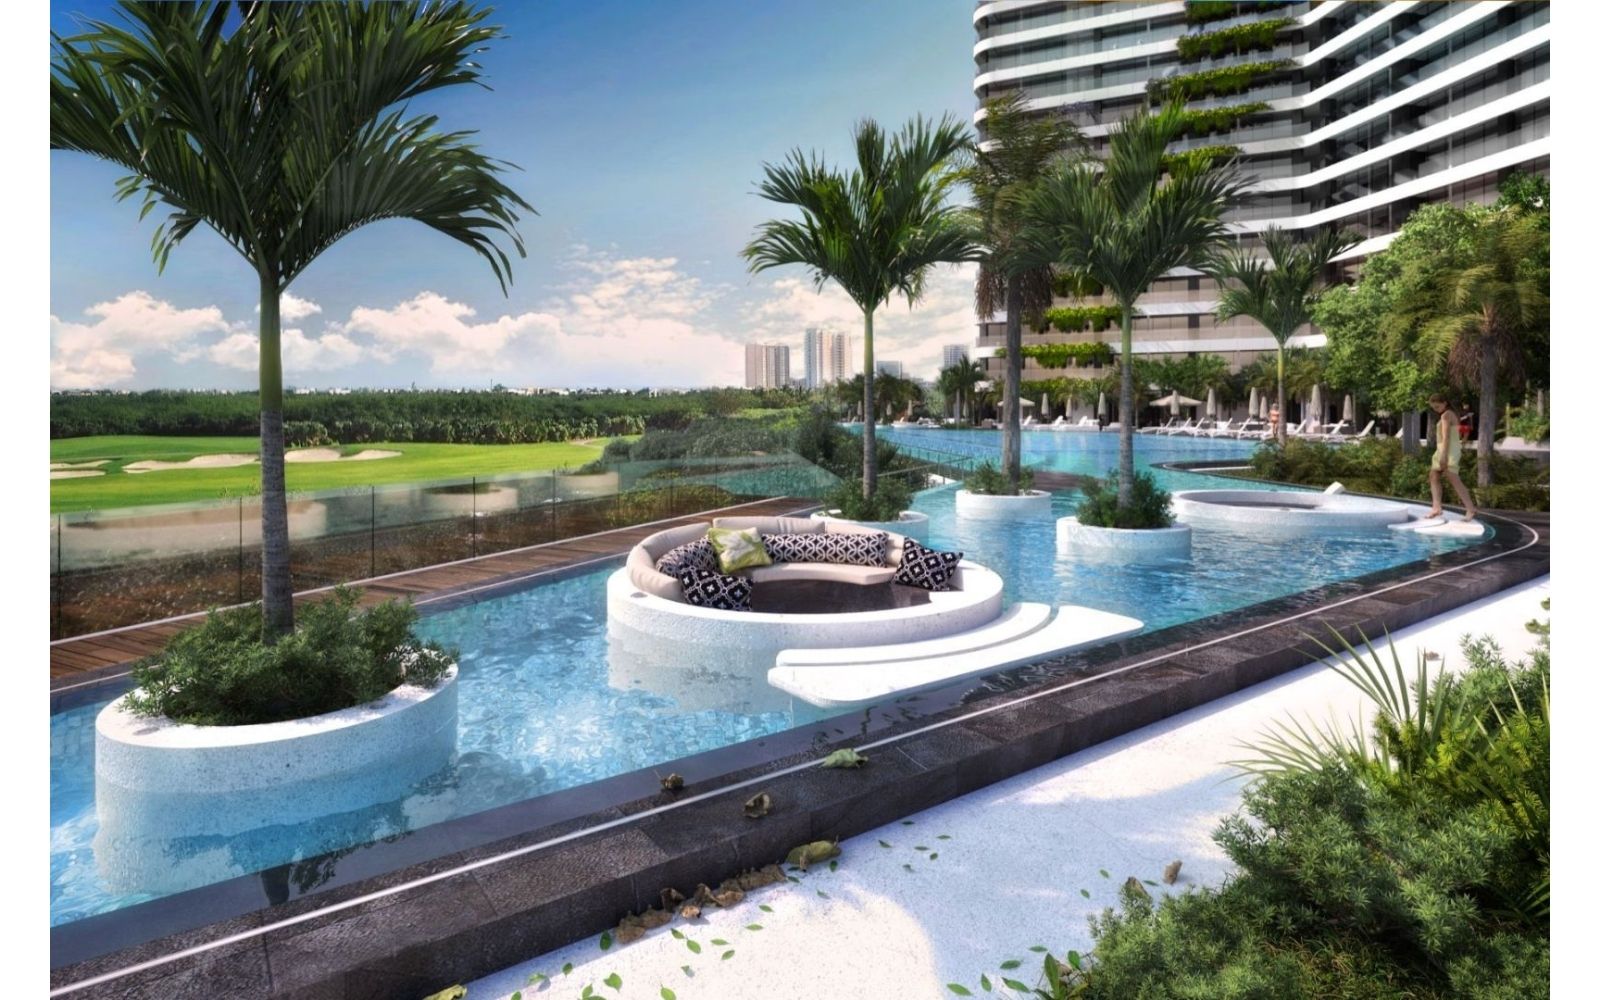 Apartment in Puerto Cancun, Golf Course, beach club, common Pool, for Sale